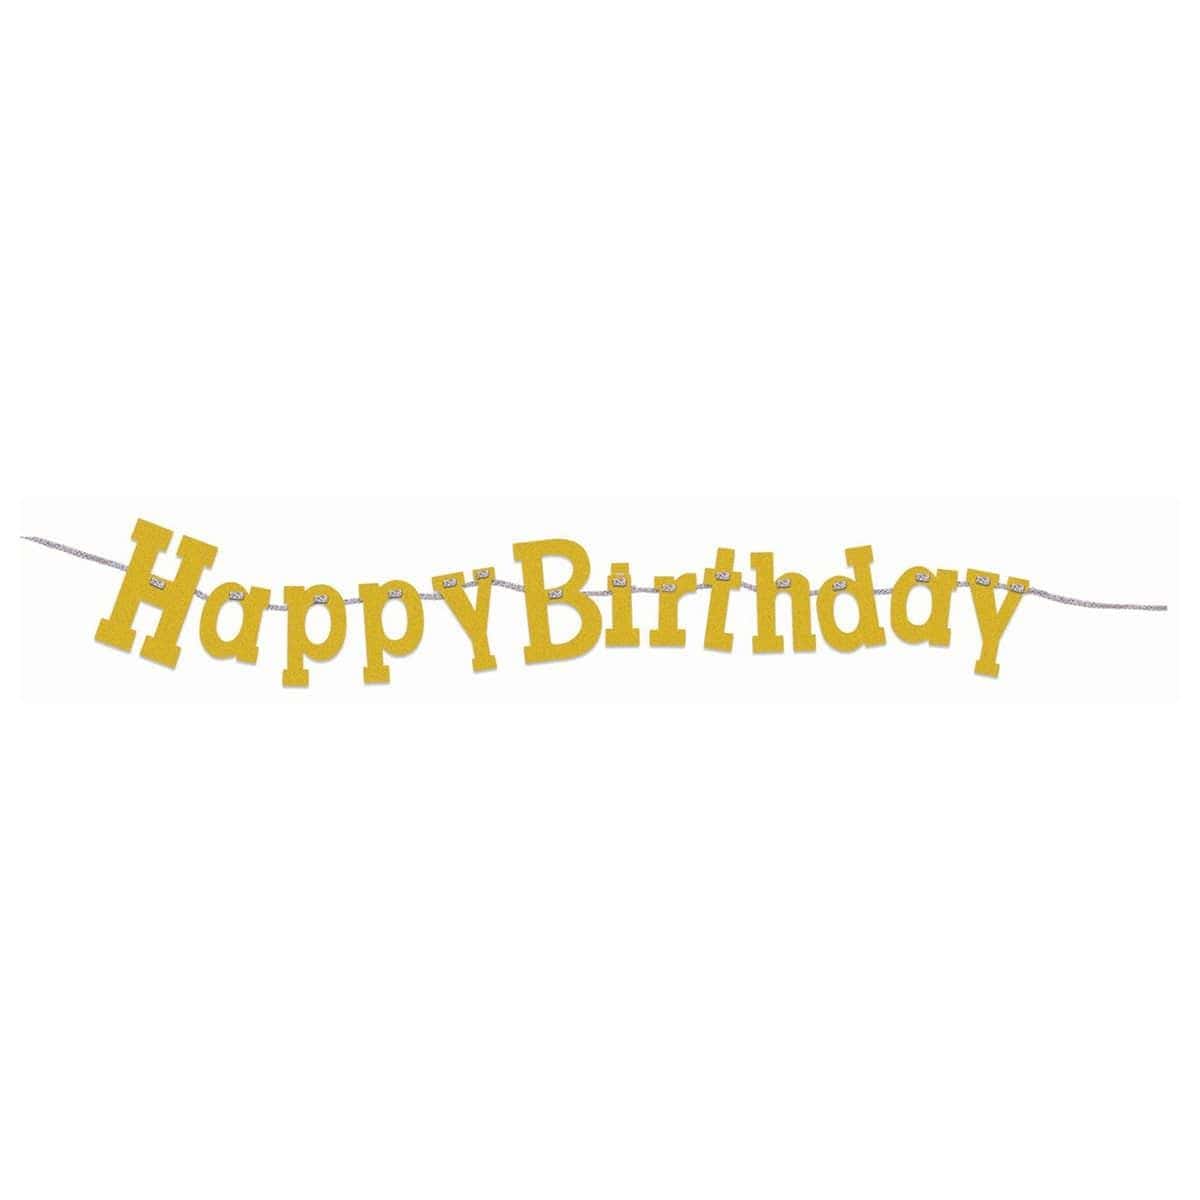 Buy General Birthday Diamond Banners 11 In. - Happy Birthday - Gold sold at Party Expert